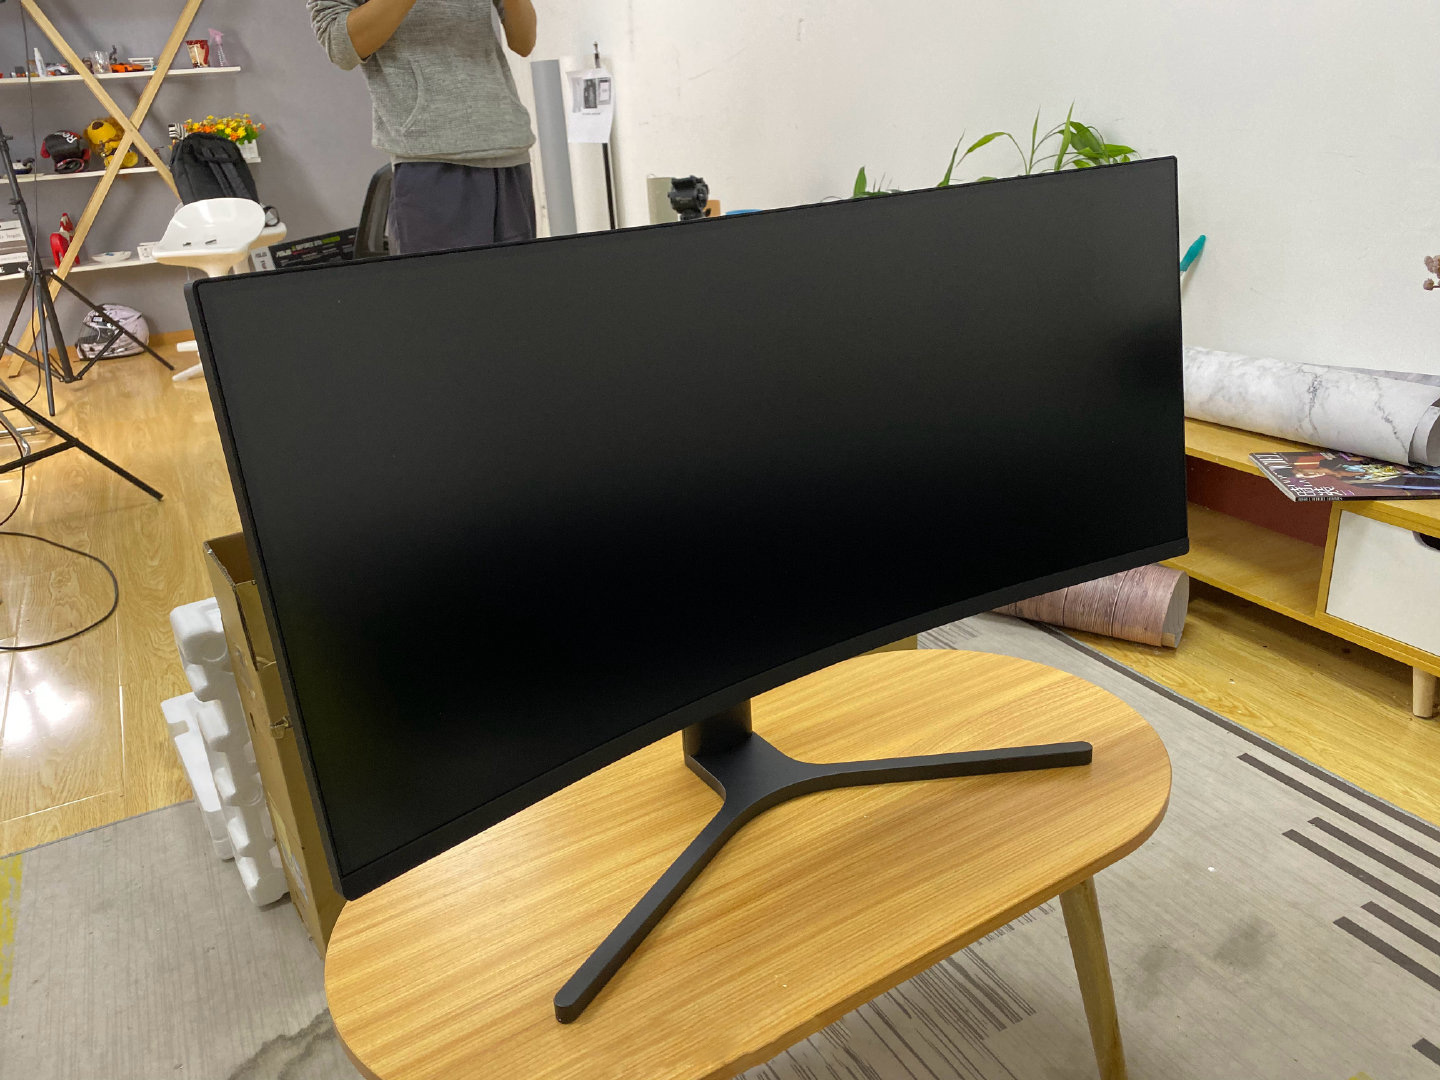 Xiaomi Curved Game Monitor